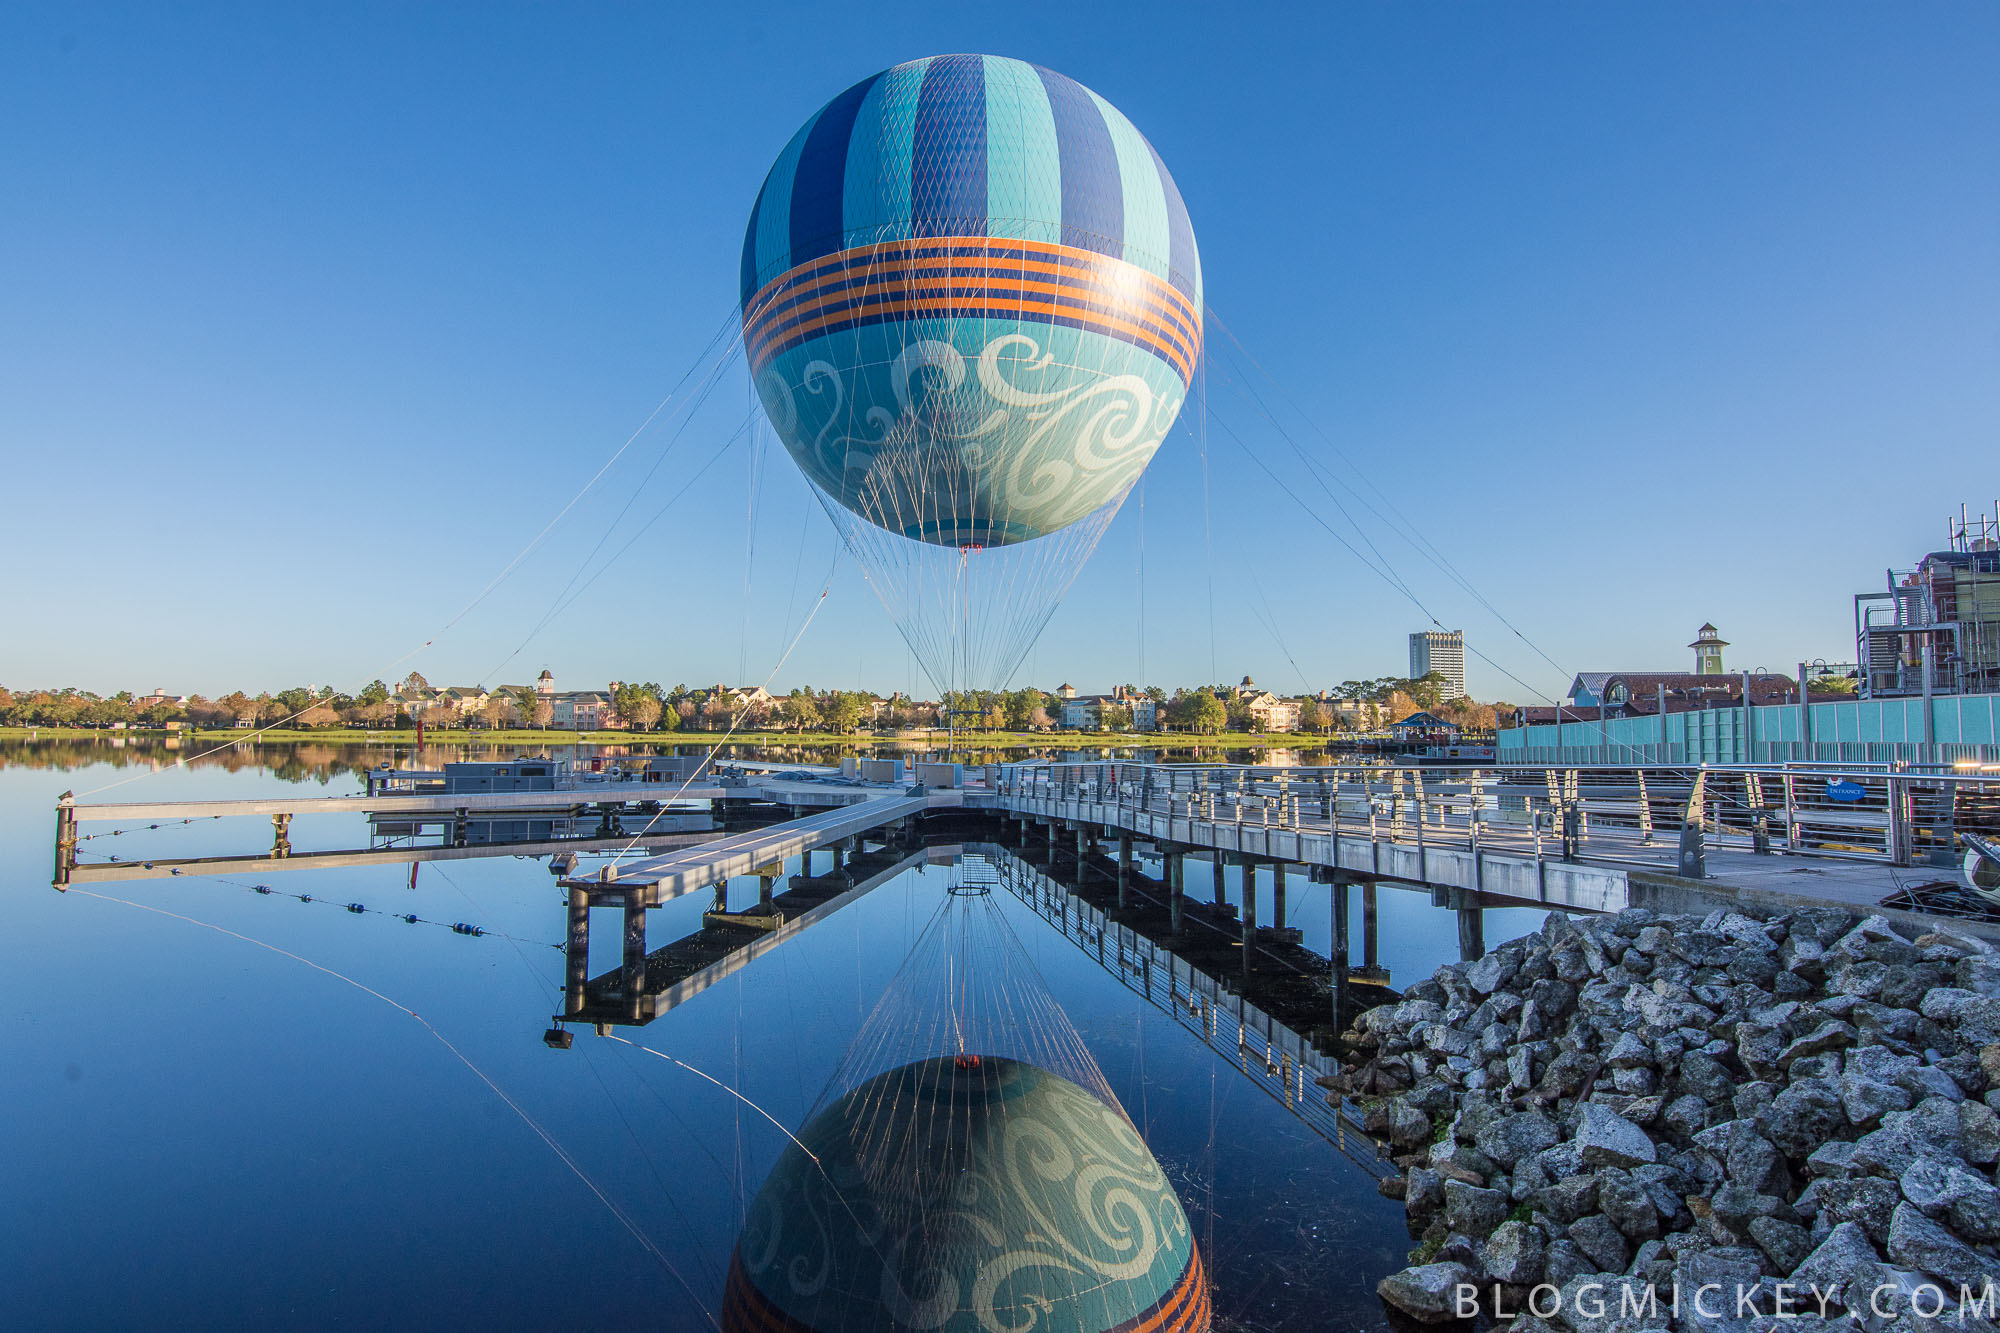 New ‘Characters in Flight’ hot air balloon design unveiled this morning!